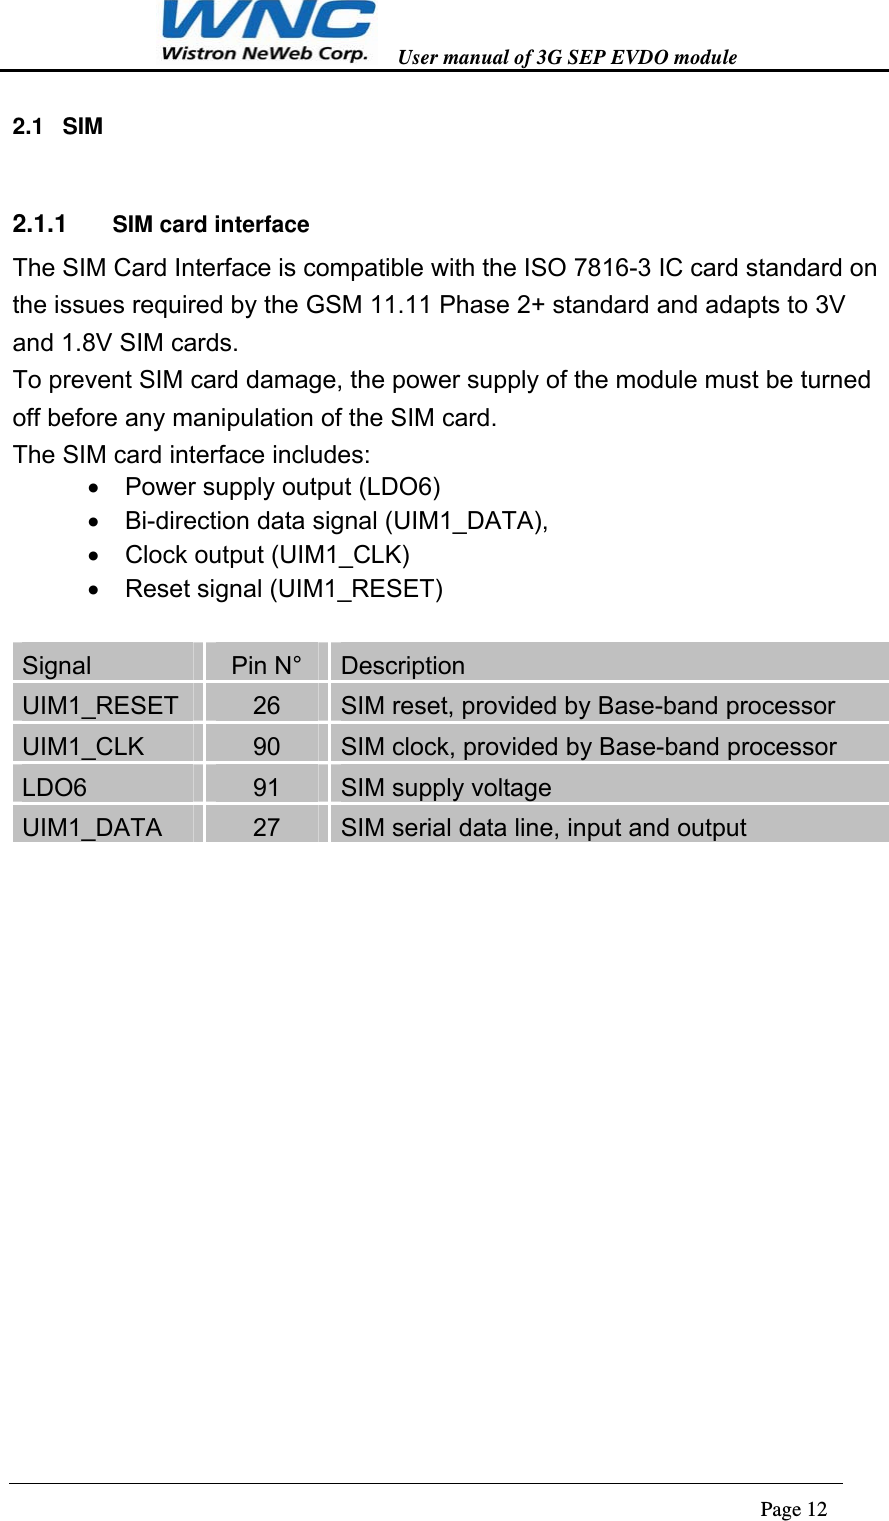   User manual of 3G SEP EVDO module                                                                      Page 12  2.1 SIM 2.1.1  SIM card interface The SIM Card Interface is compatible with the ISO 7816-3 IC card standard on the issues required by the GSM 11.11 Phase 2+ standard and adapts to 3V and 1.8V SIM cards. To prevent SIM card damage, the power supply of the module must be turned off before any manipulation of the SIM card. The SIM card interface includes:   Power supply output (LDO6)   Bi-direction data signal (UIM1_DATA),     Clock output (UIM1_CLK)   Reset signal (UIM1_RESET)  Signal  Pin N°  Description UIM1_RESET  26  SIM reset, provided by Base-band processor UIM1_CLK  90  SIM clock, provided by Base-band processor LDO6  91  SIM supply voltage UIM1_DATA  27  SIM serial data line, input and output  